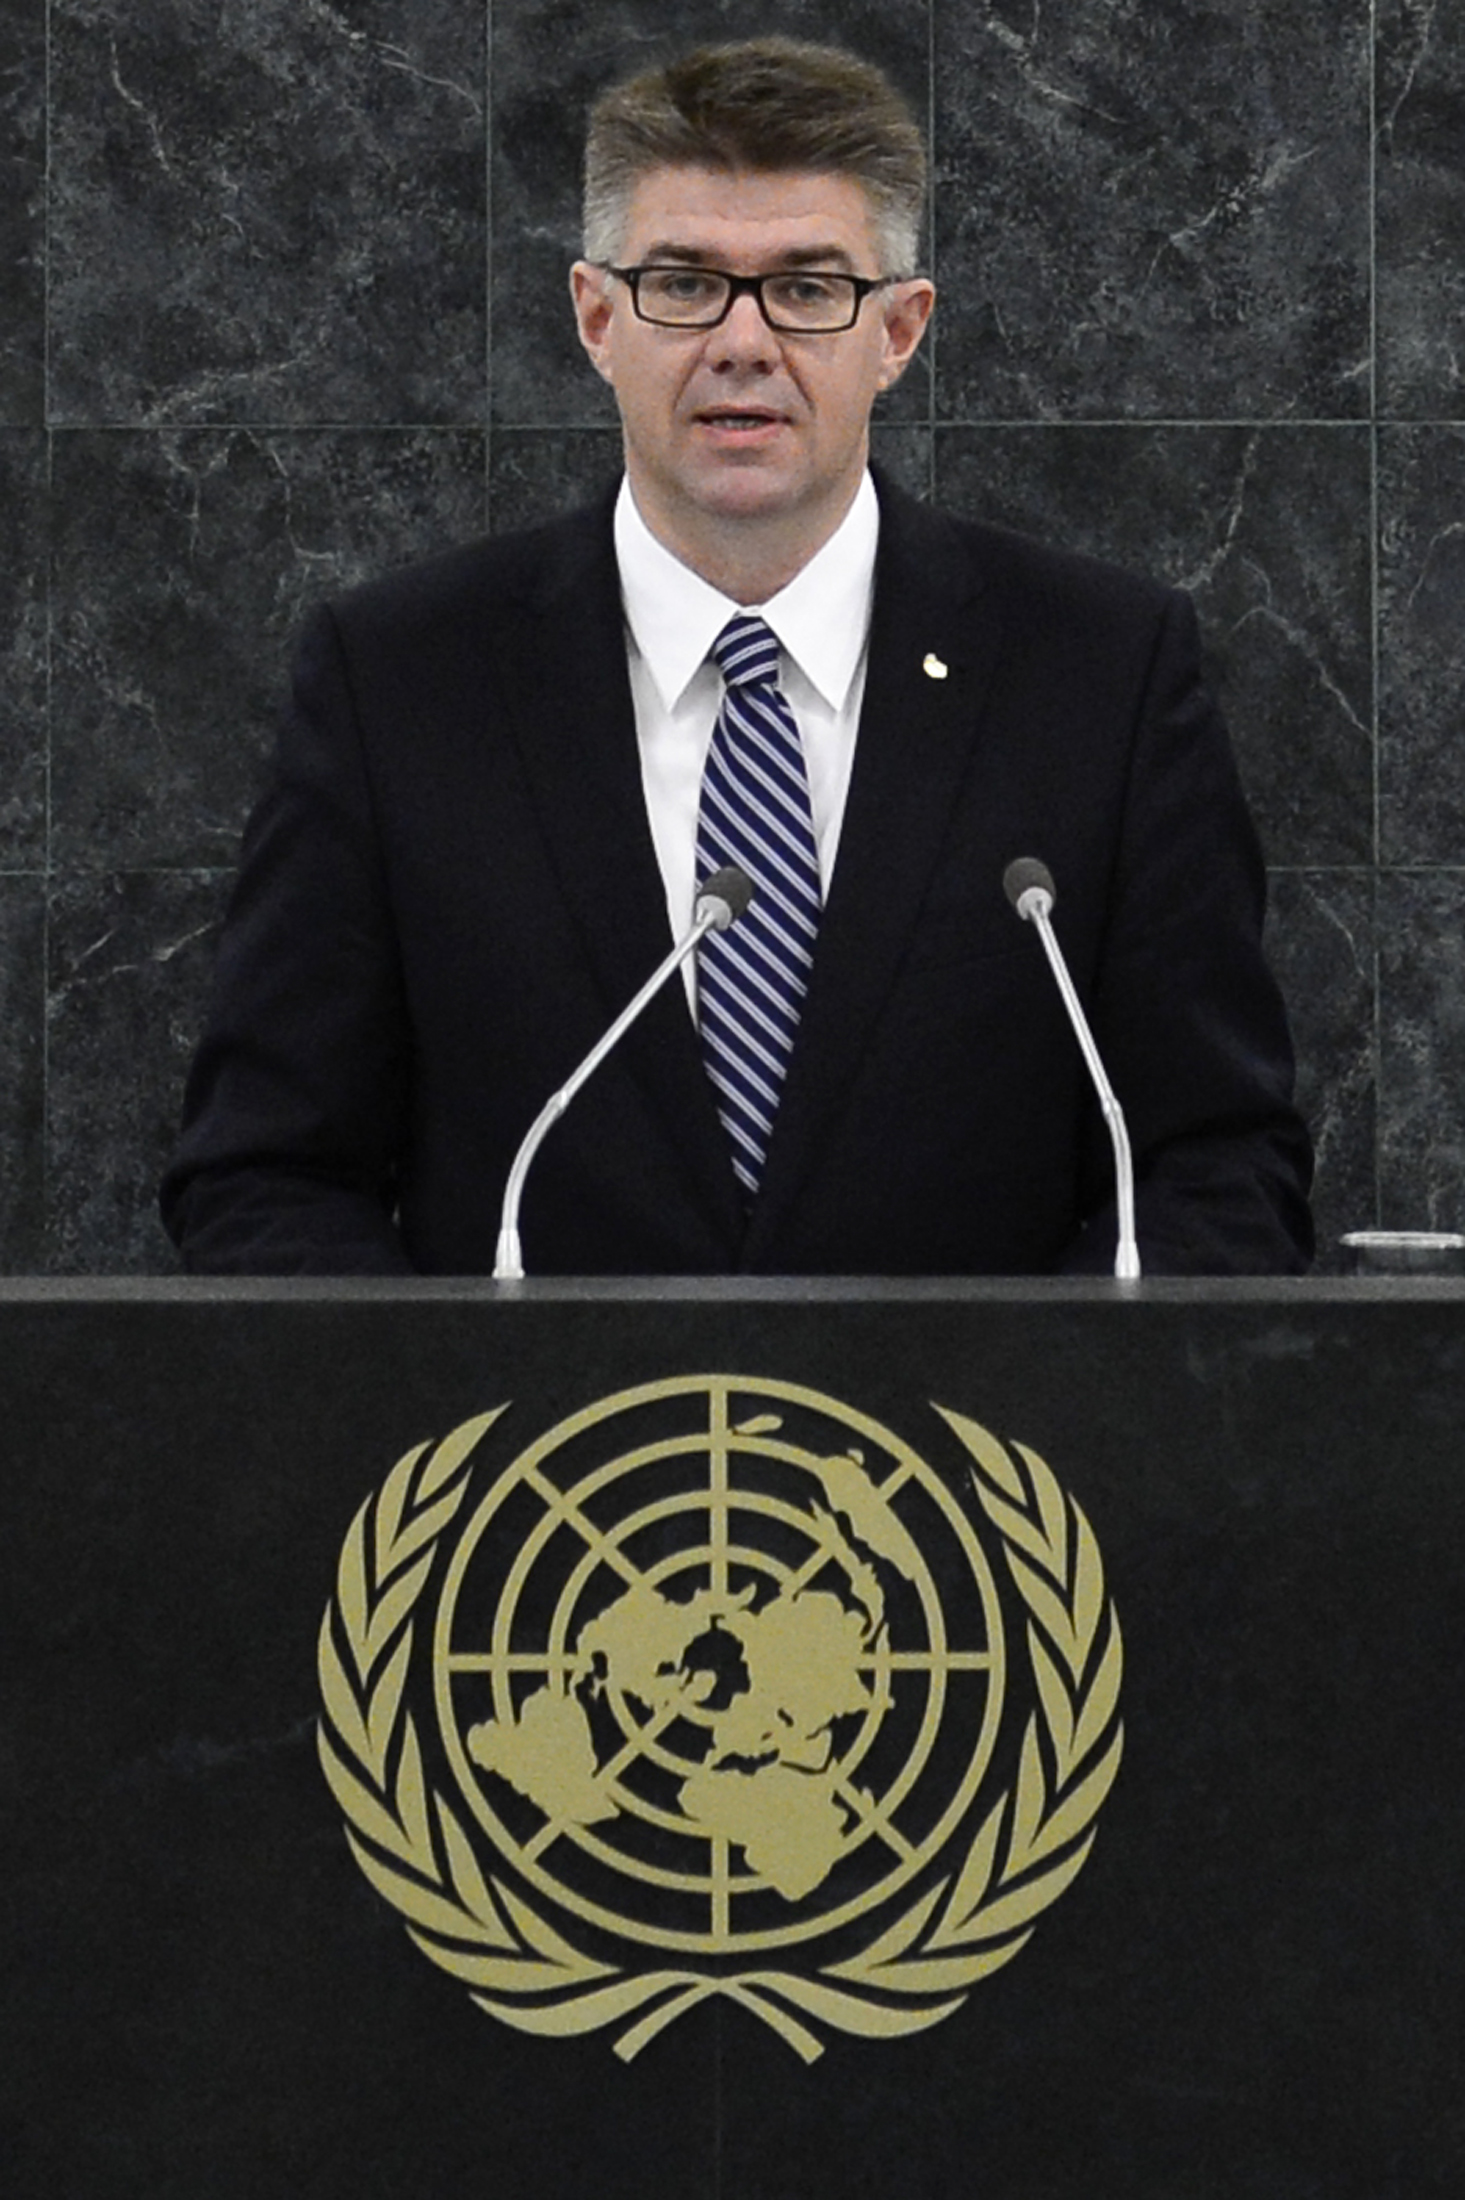 Iceland's Foreign Minister Sveinsson addresses the 68th session of the U.N. General Assembly in New York